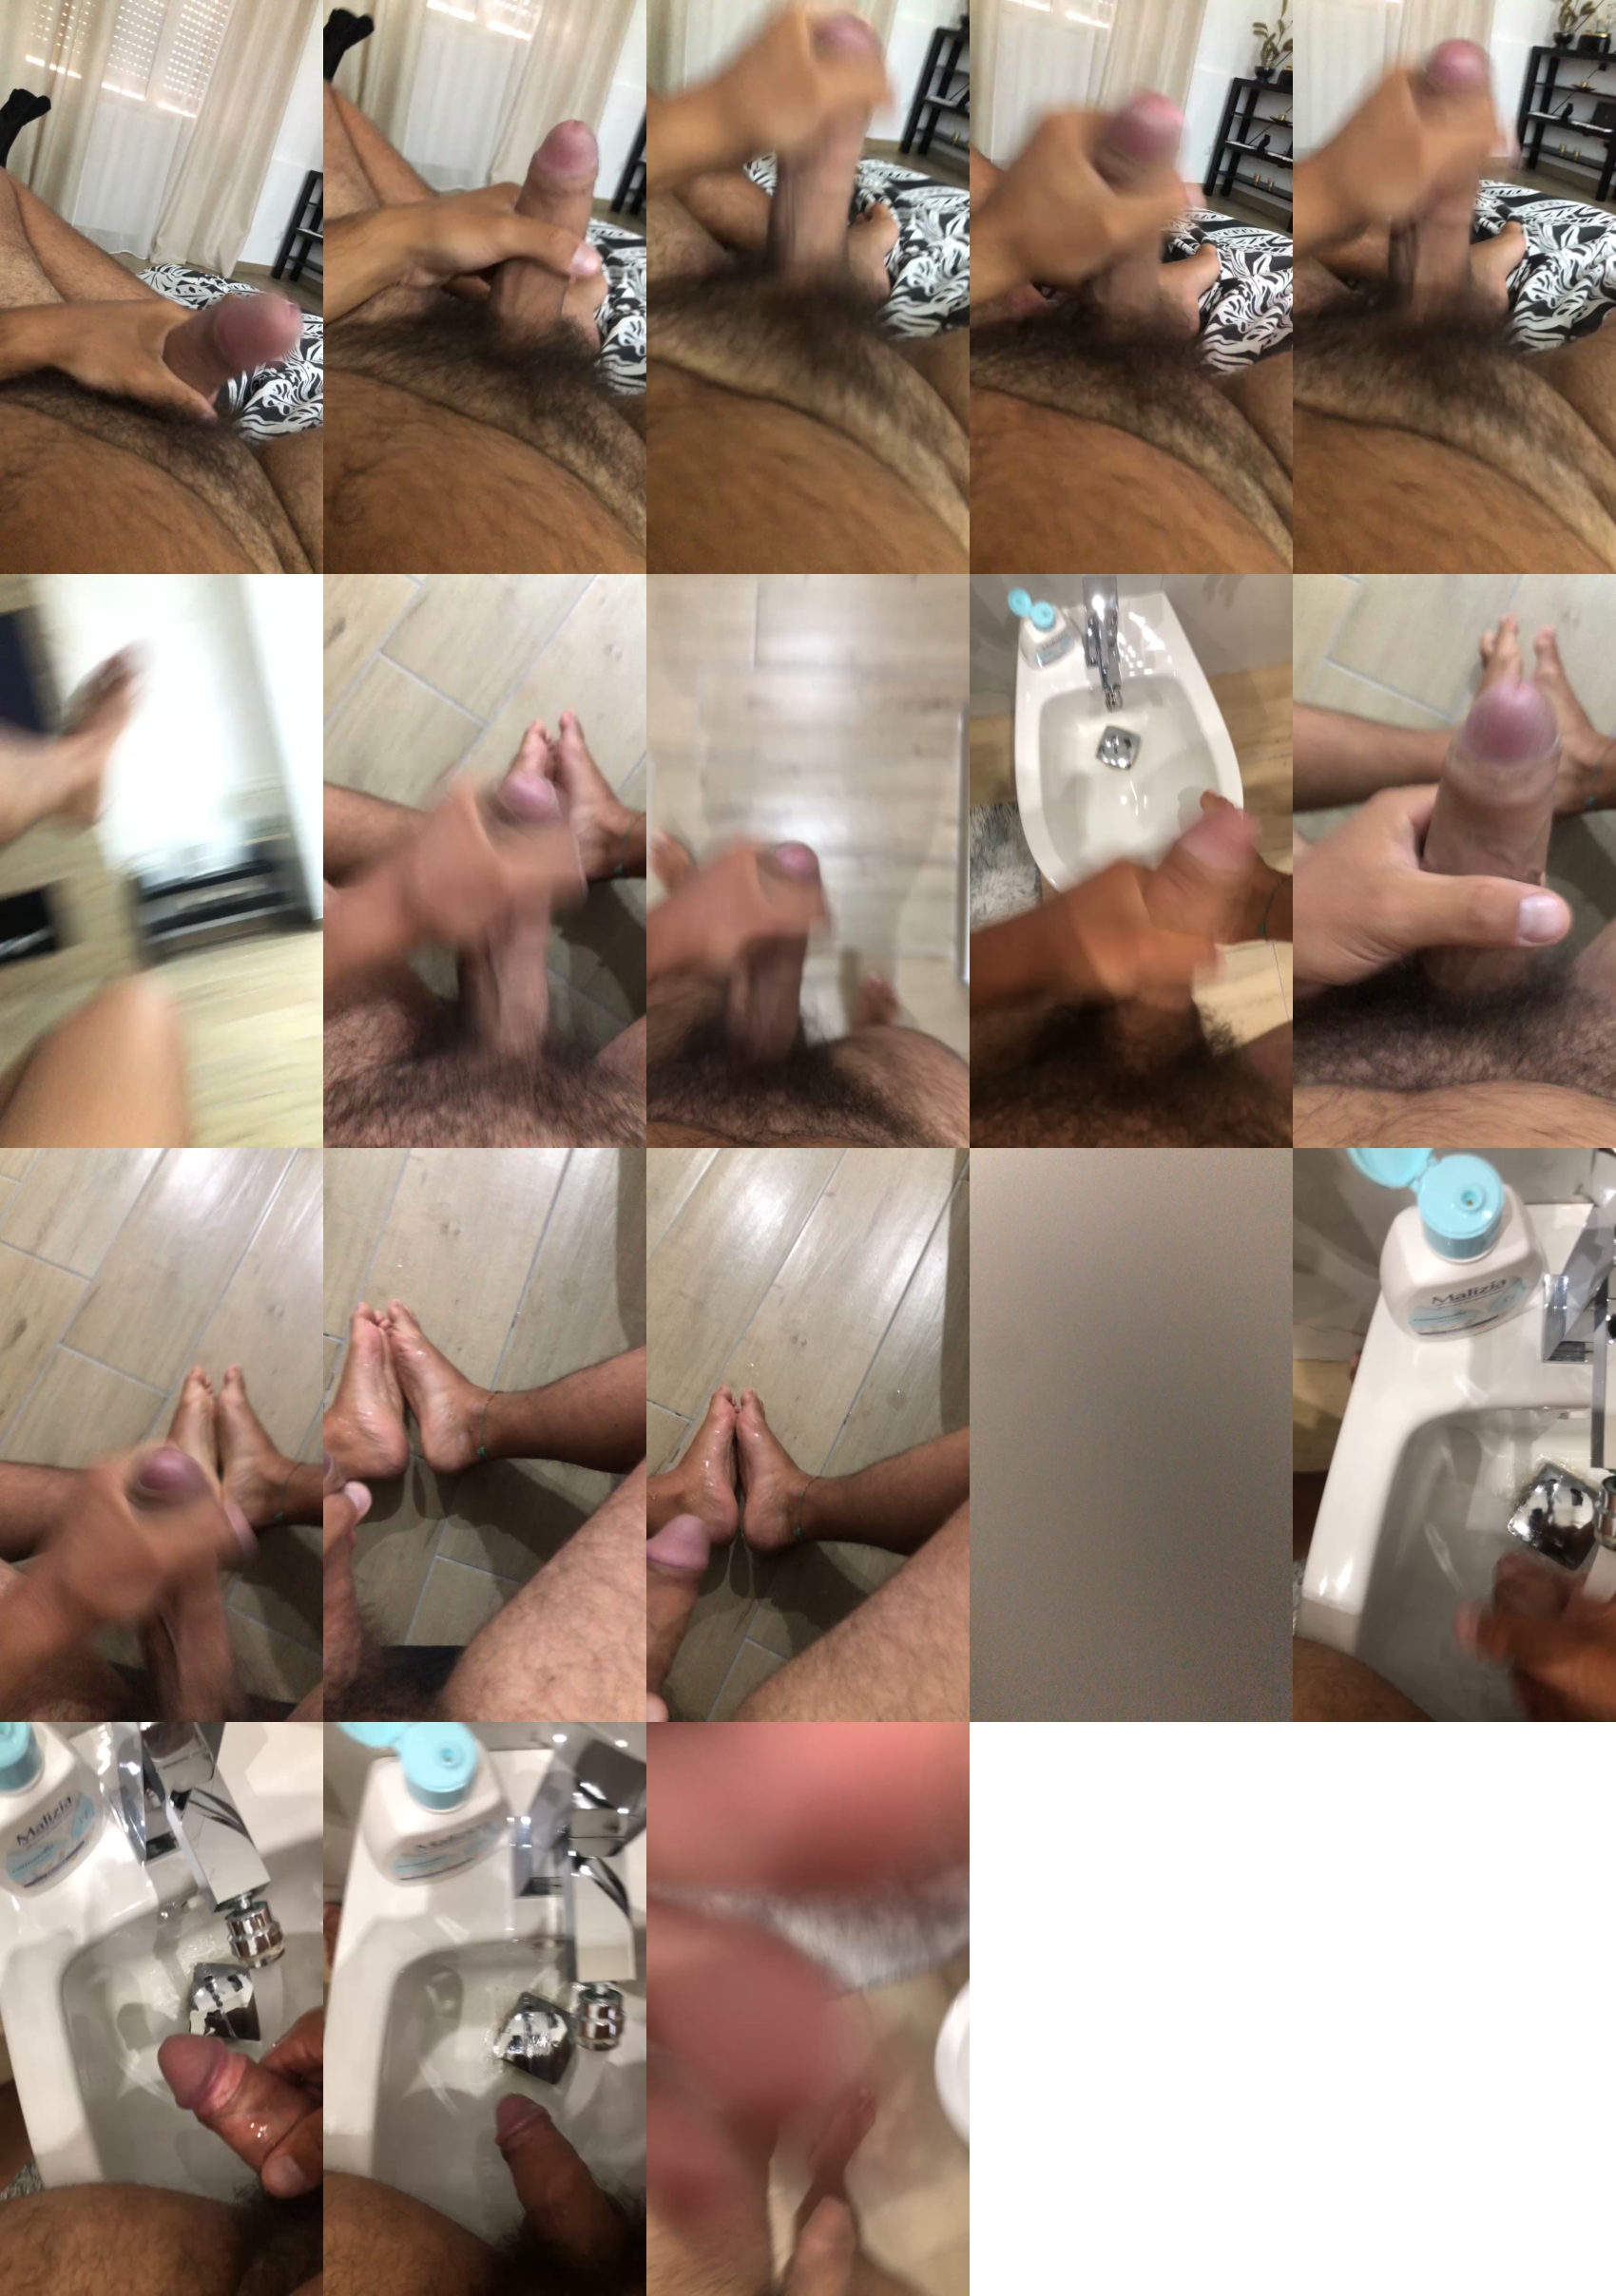 Peppereale  03-08-2022 Recorded Video sexyfeet